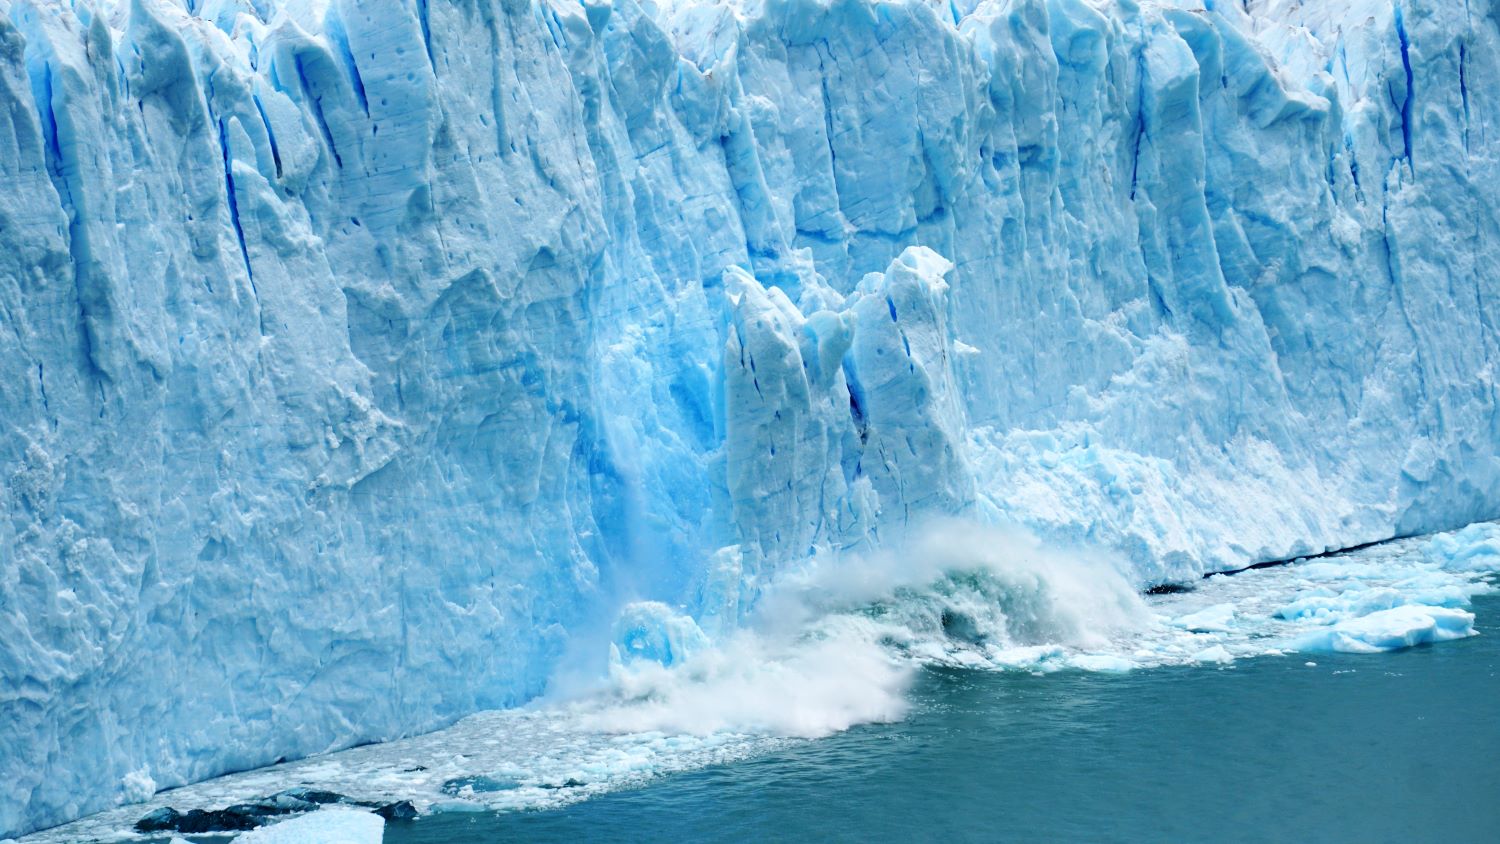 What’s happening to the world’s glaciers?